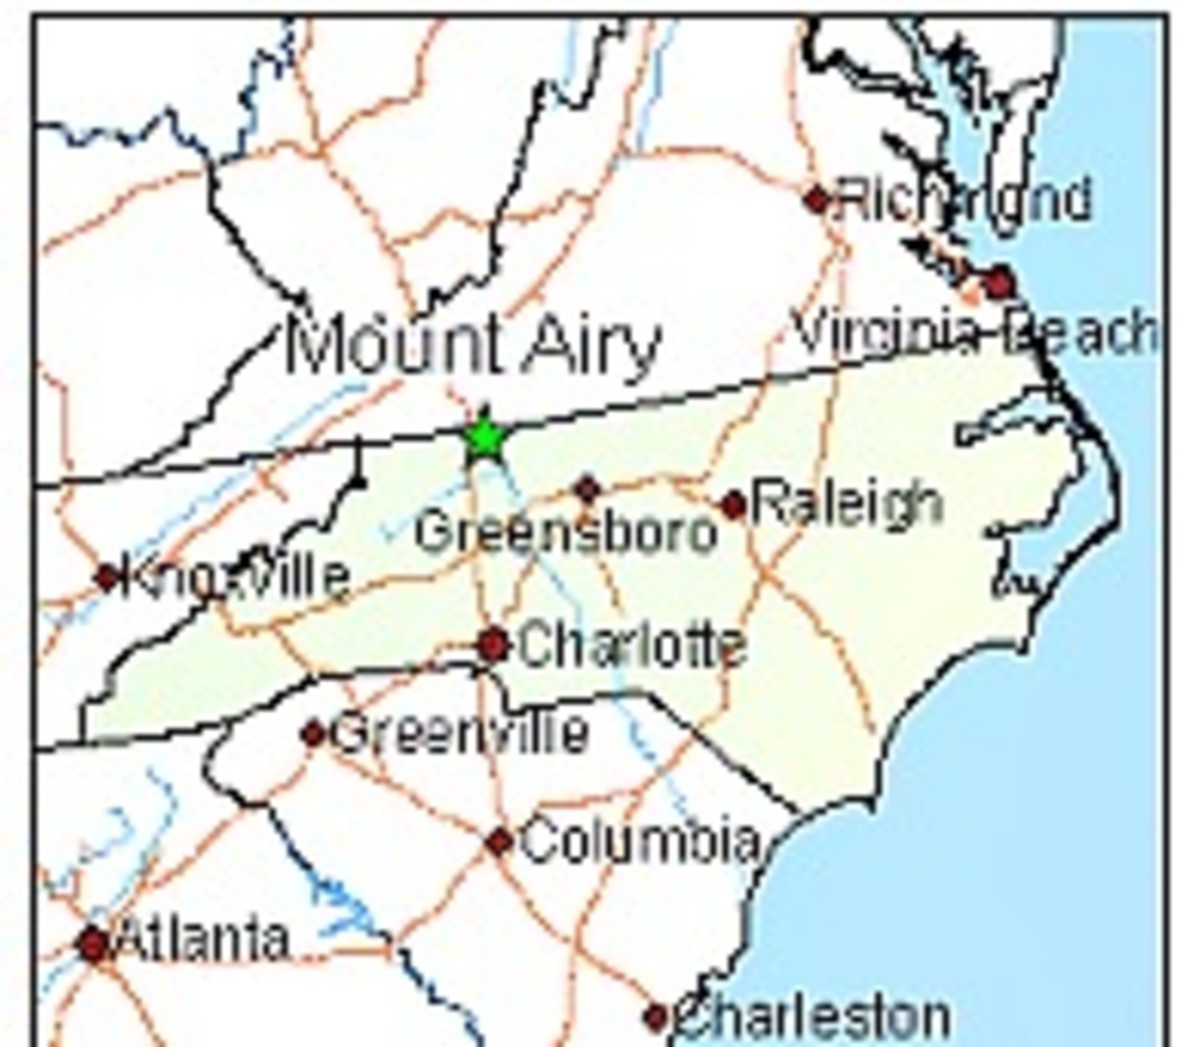 Mt. Airy, NC is located on the border of Virginia and North Carolina